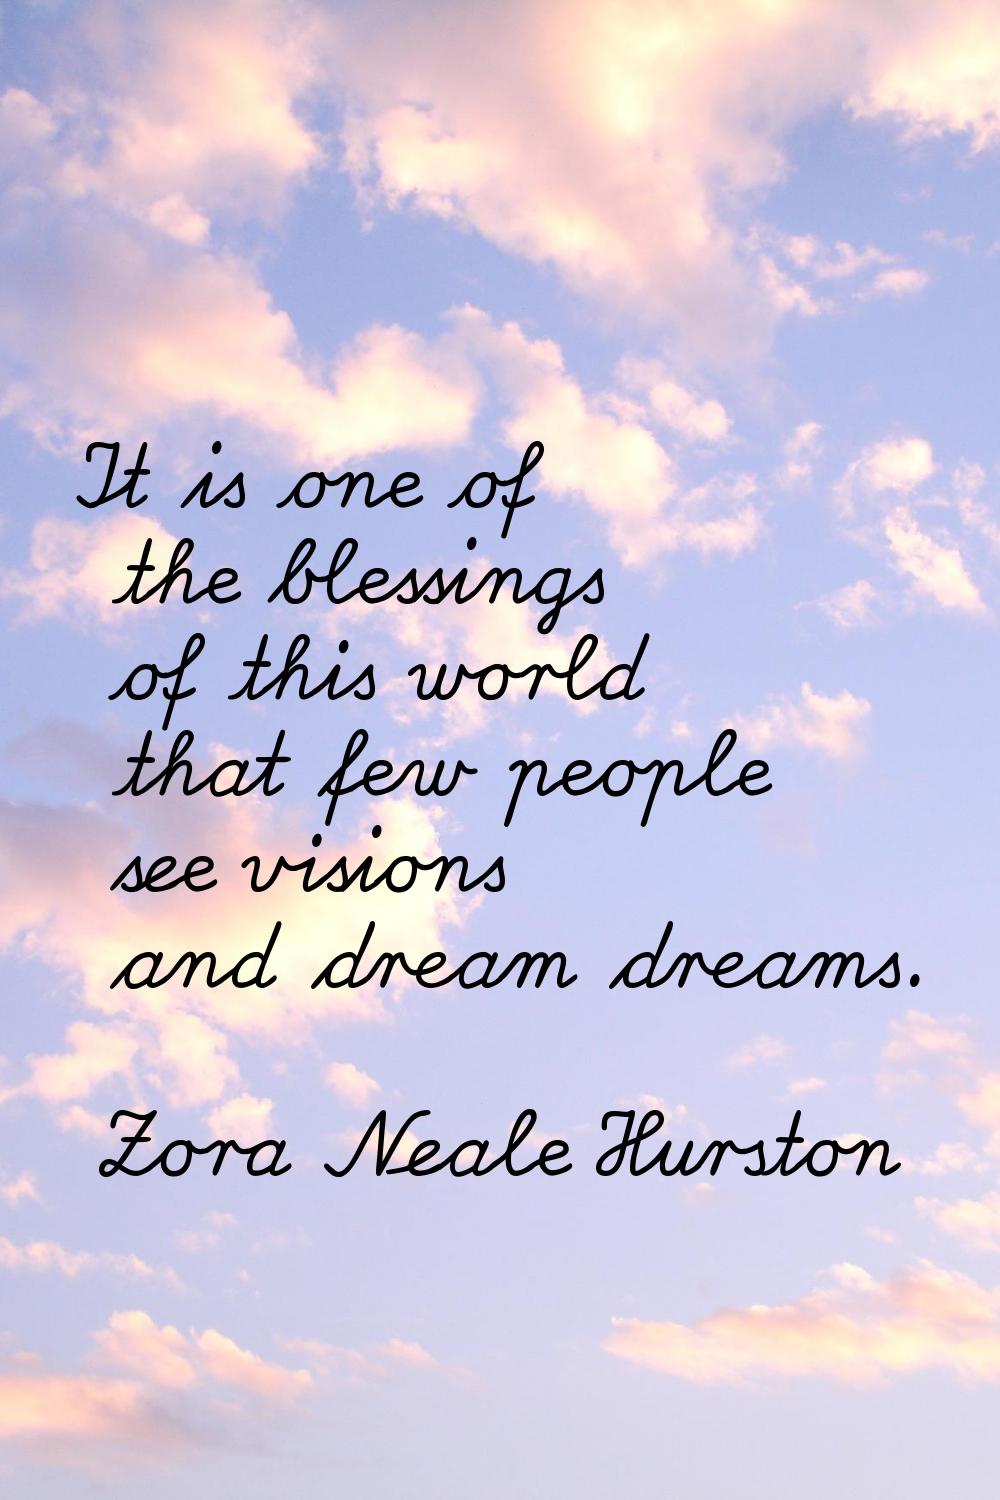 It is one of the blessings of this world that few people see visions and dream dreams.